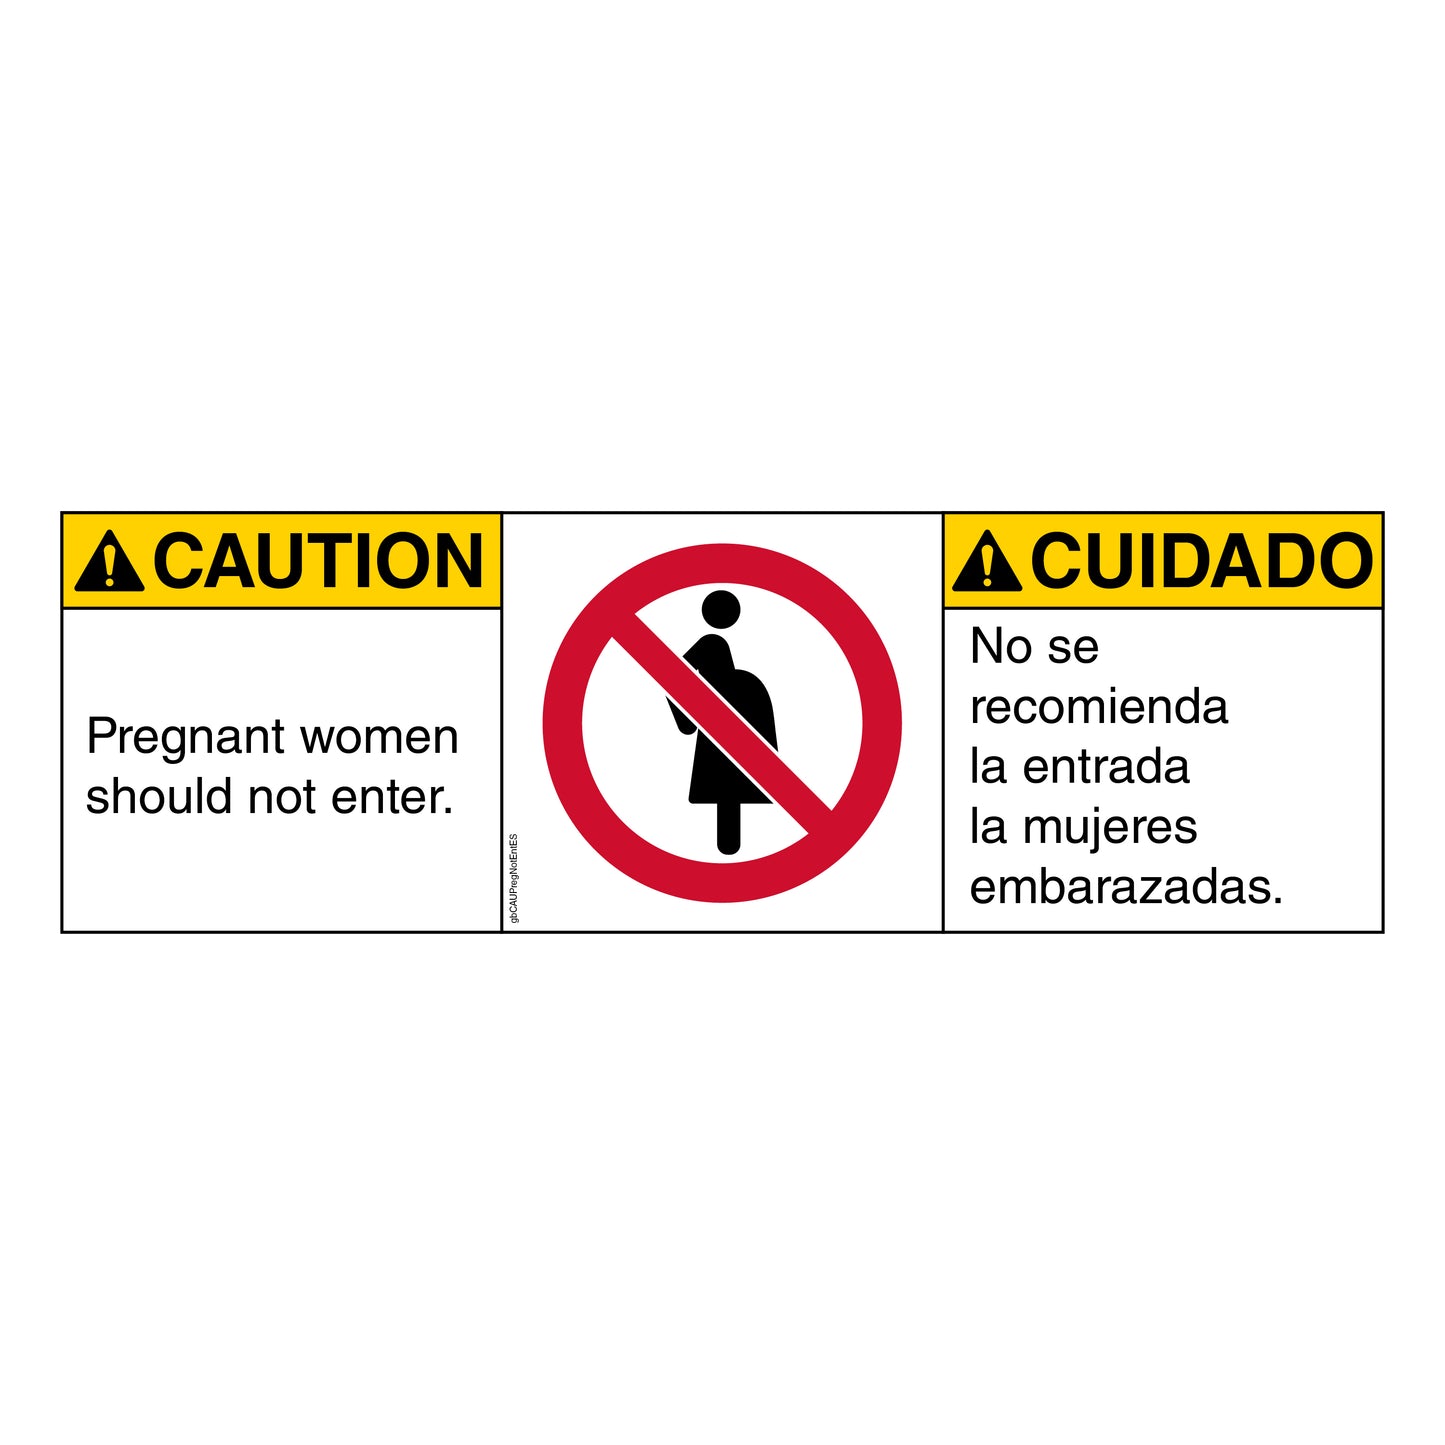 Caution Pregnant Women Should Not Enter Decal in English and Spanish.